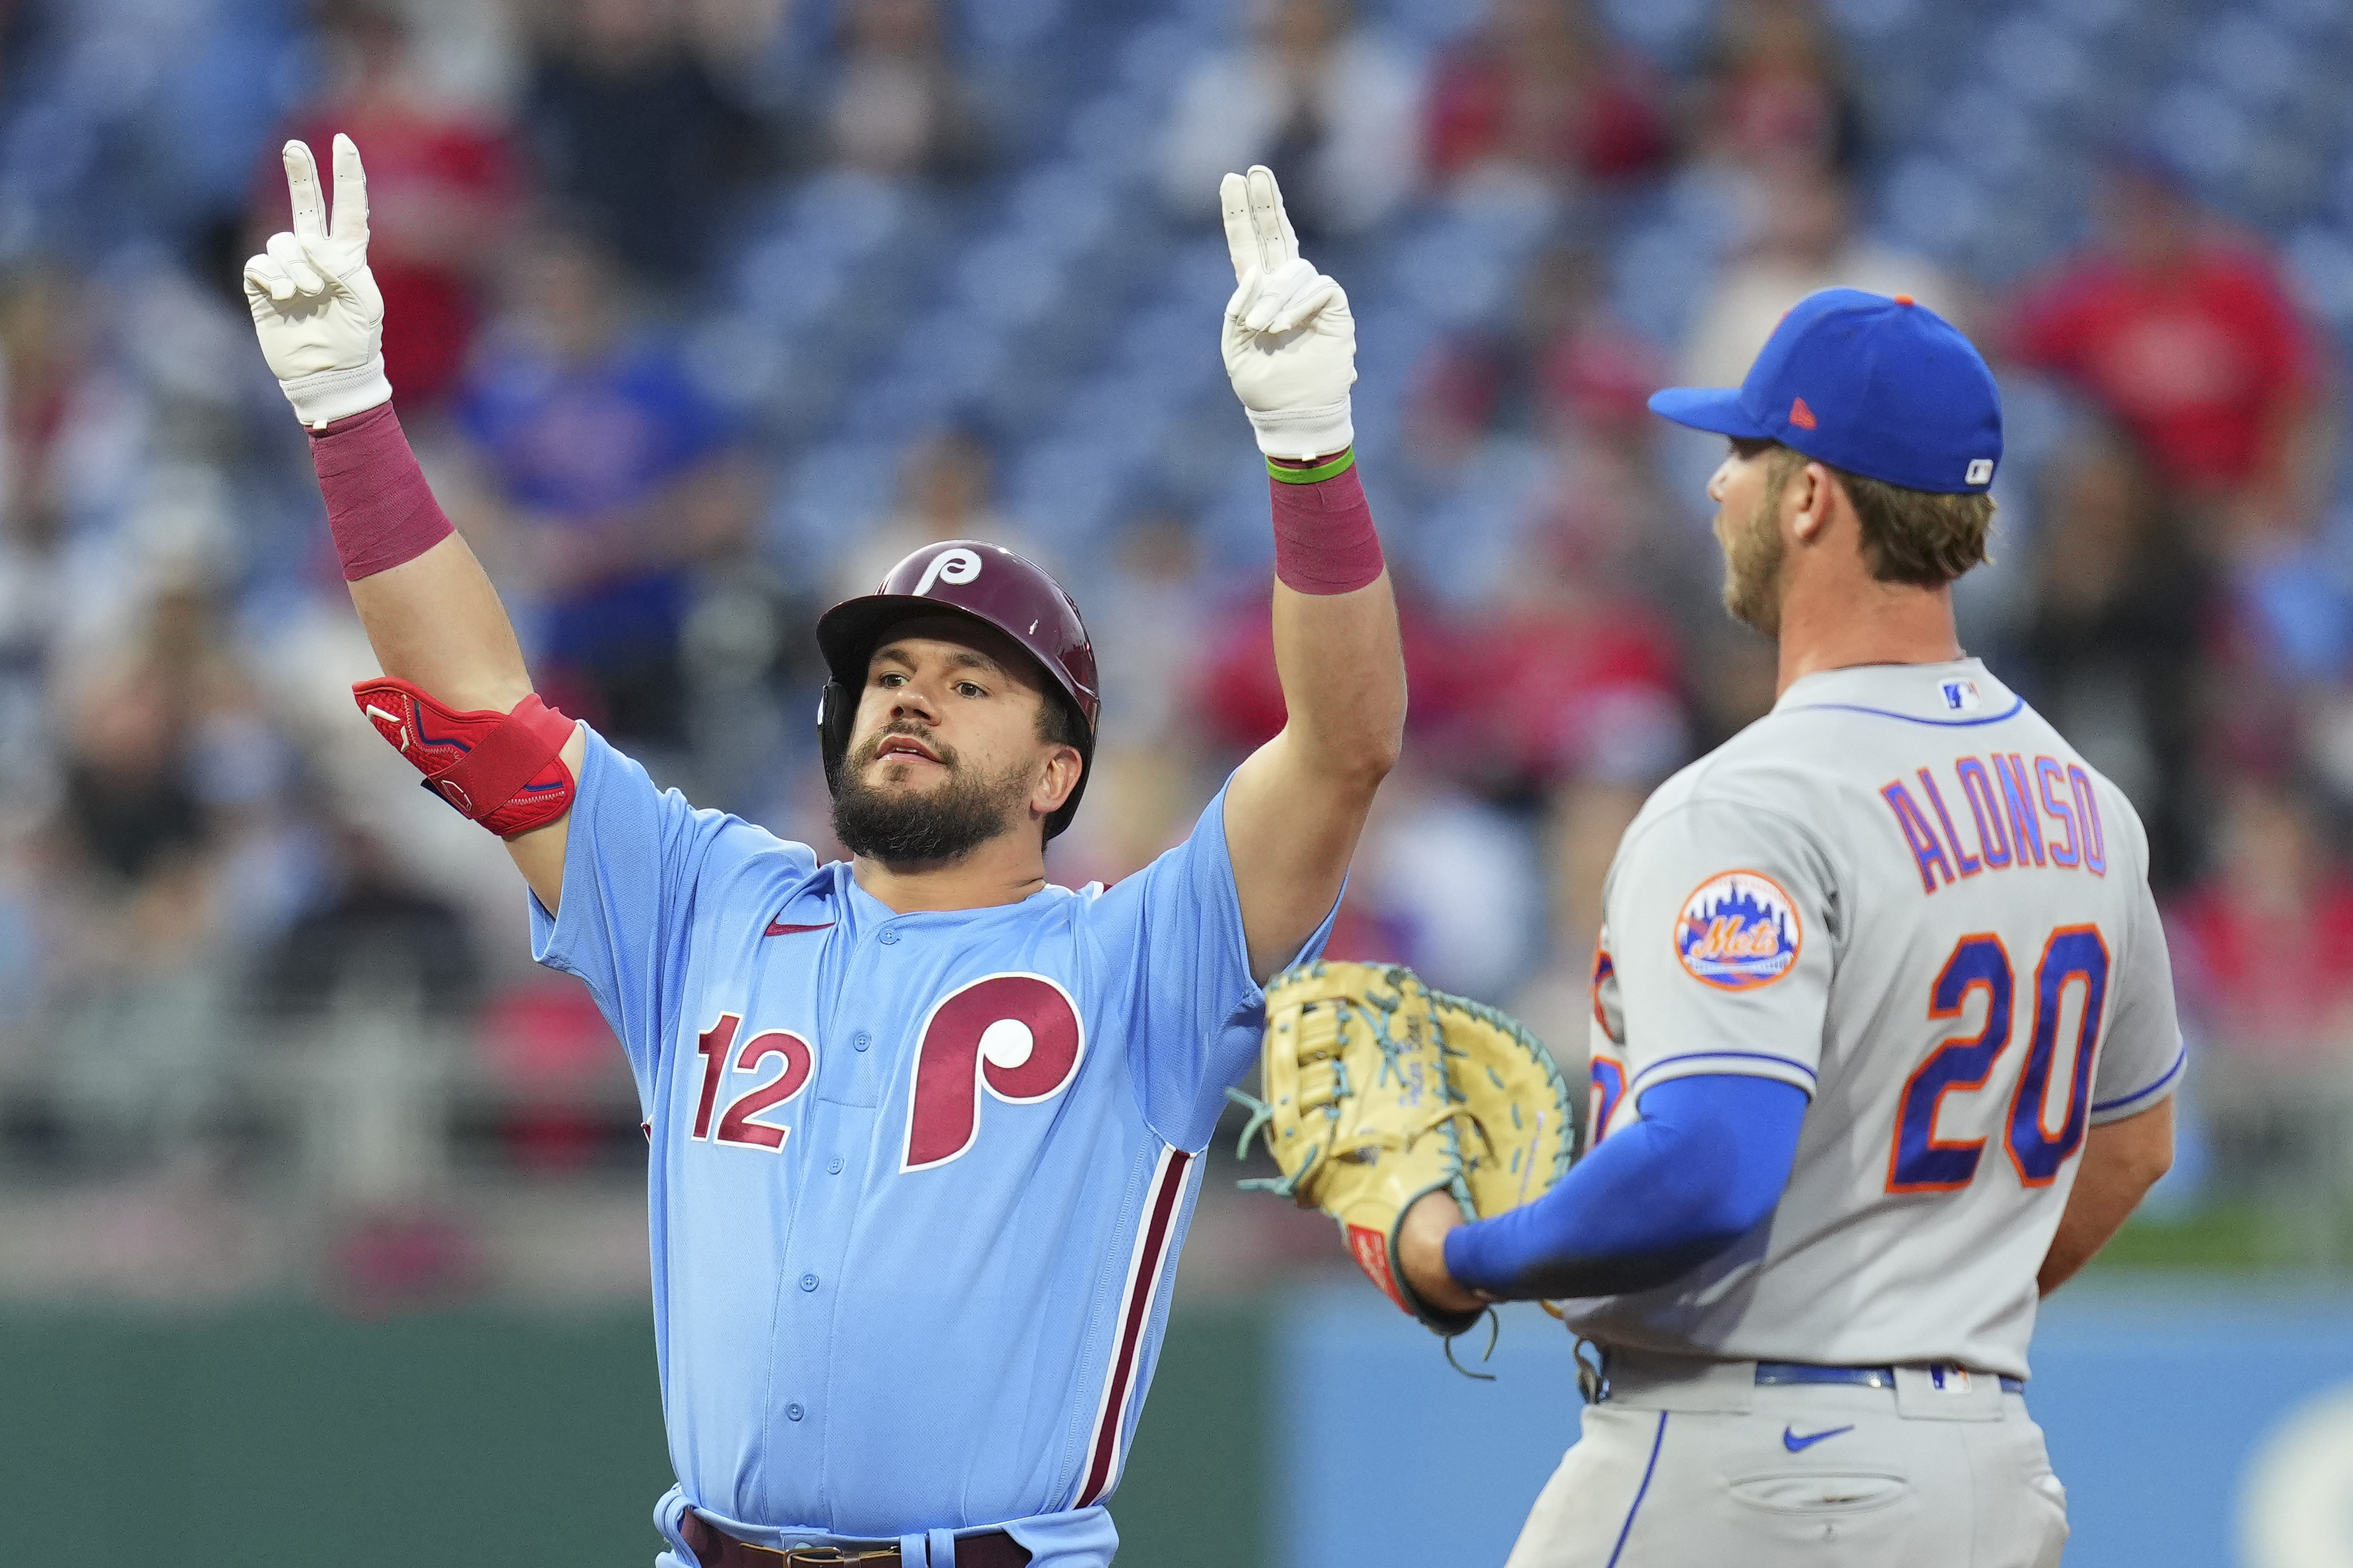 Ranking All Five Current Phillies Uniforms From Worst to Best